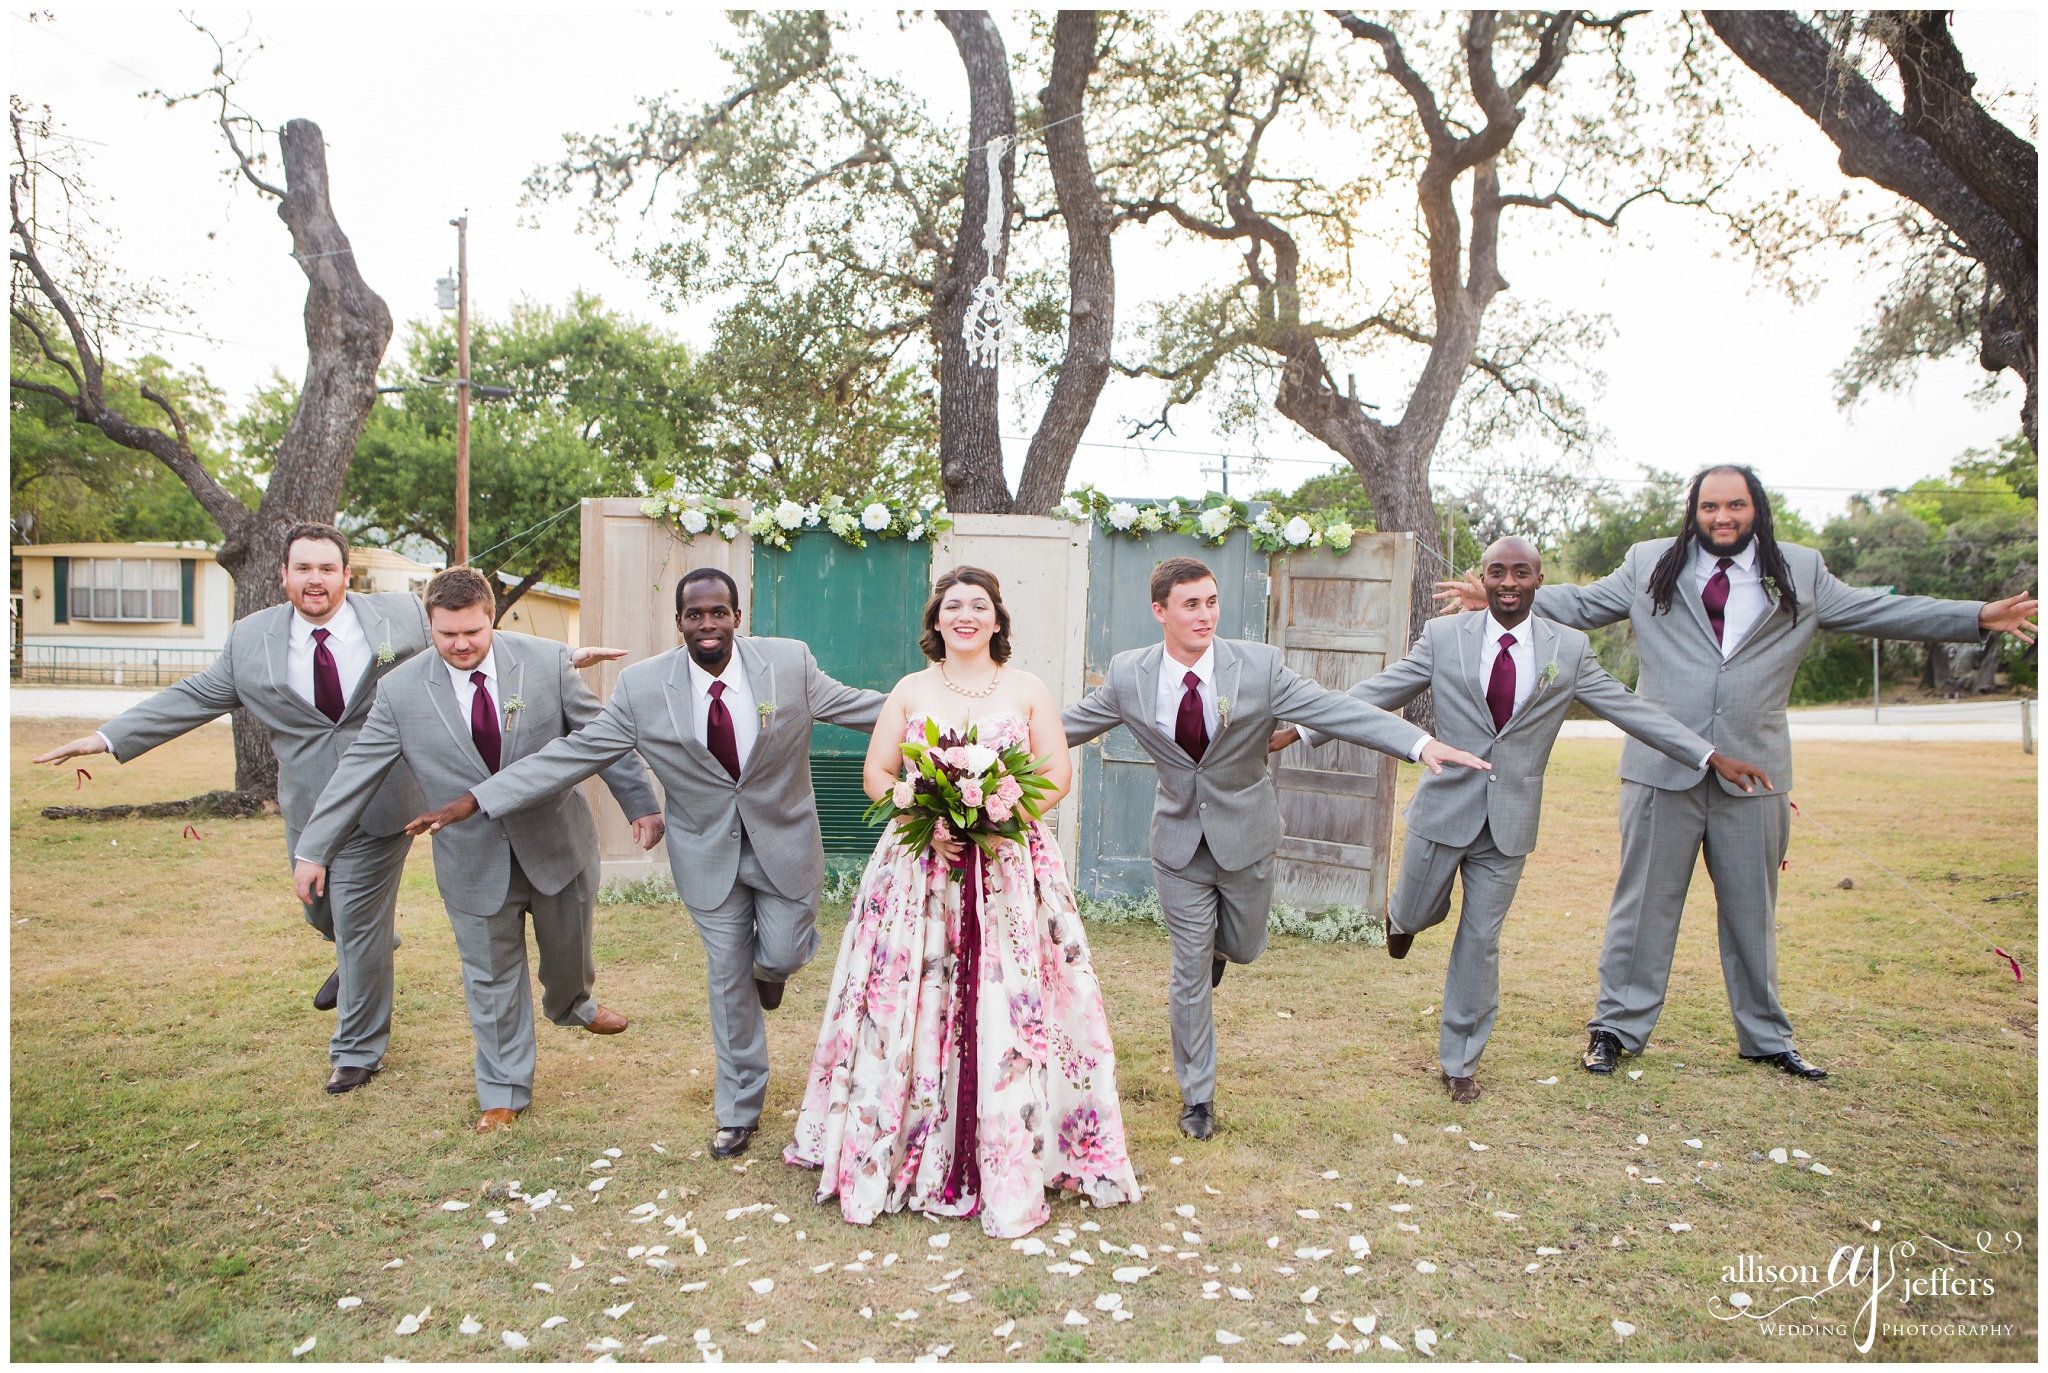 Kerrville Wedding Photographer Unique fun wedding with floral dress 0059